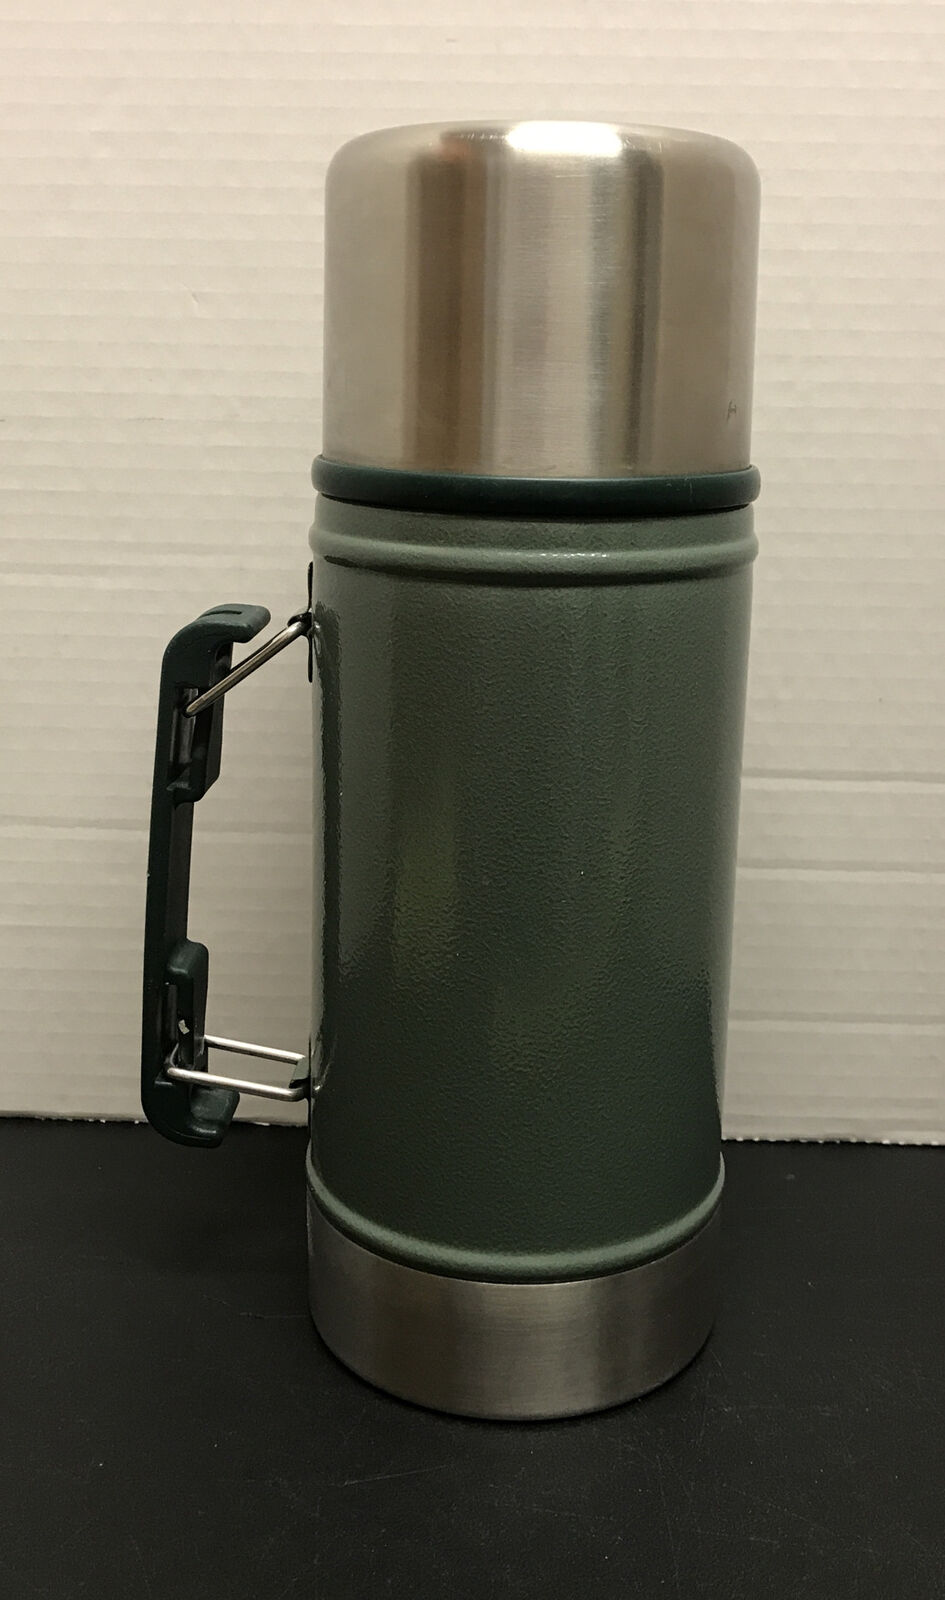  Stanley Classic Vacuum Food Jar 24oz Hammertone Green :  Thermos Stanley : Sports & Outdoors